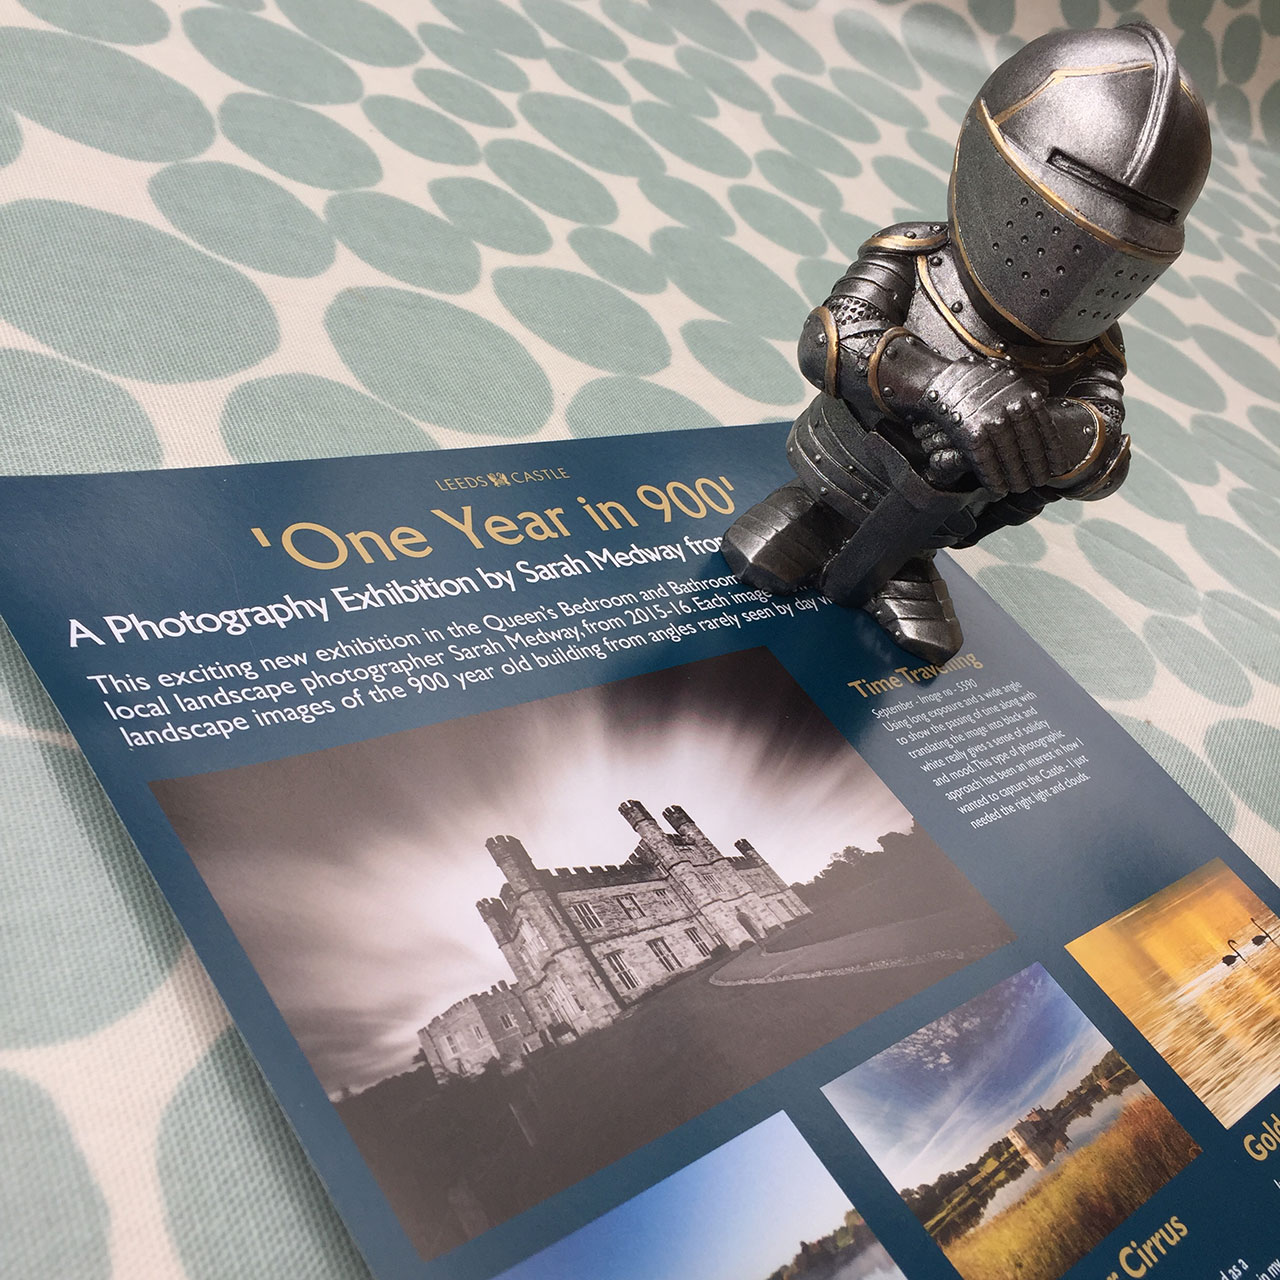 leeds castle one year in 900 exhibition